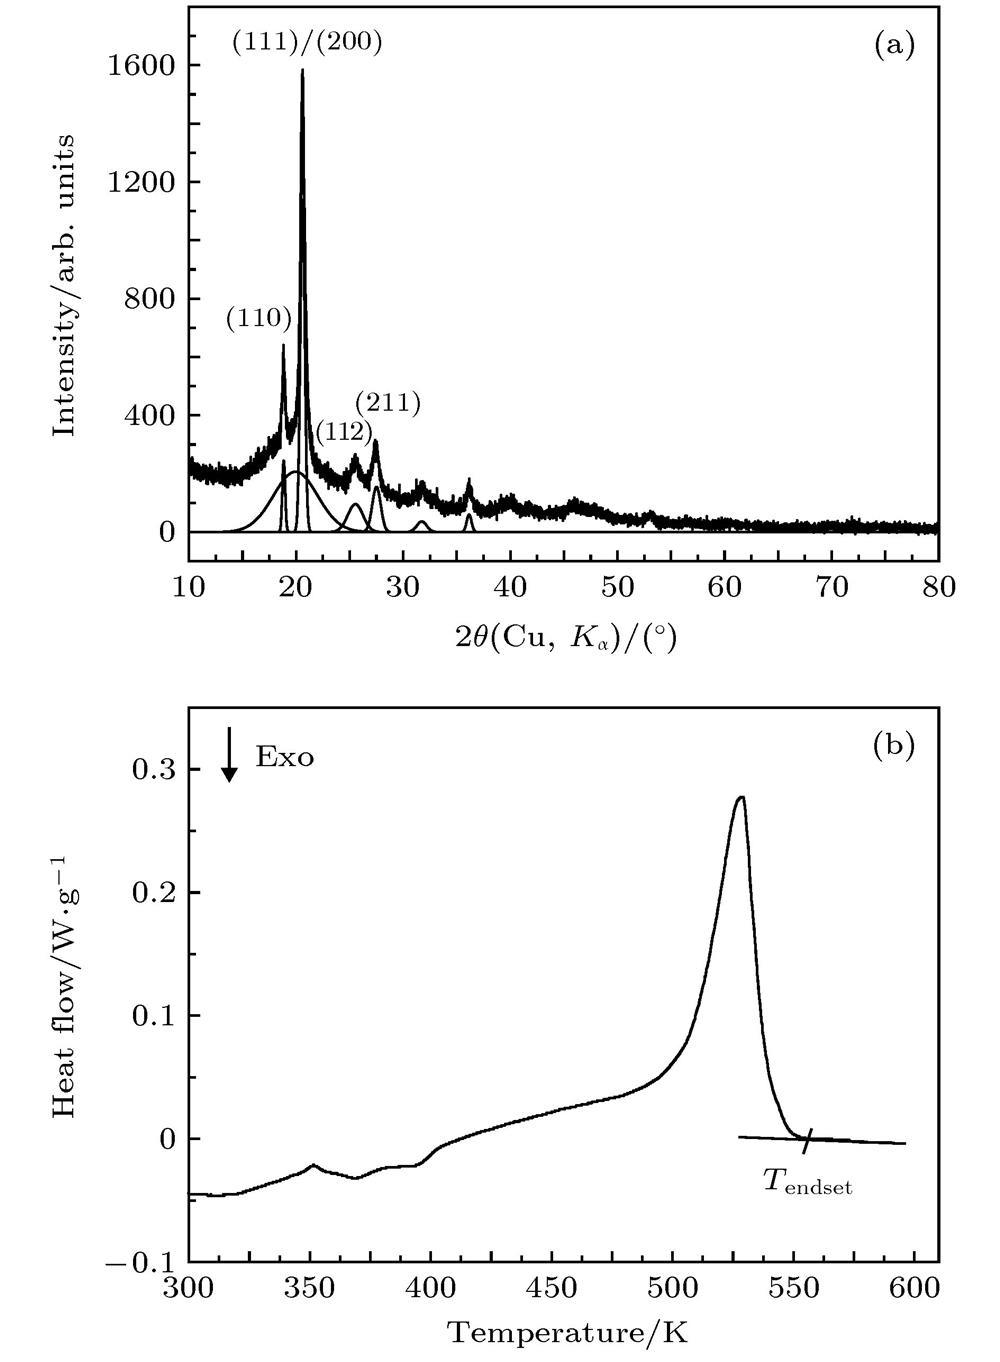 (a) XRD pattern and (b) DSC trace of polyphenylene sulfide (PPS) powder.